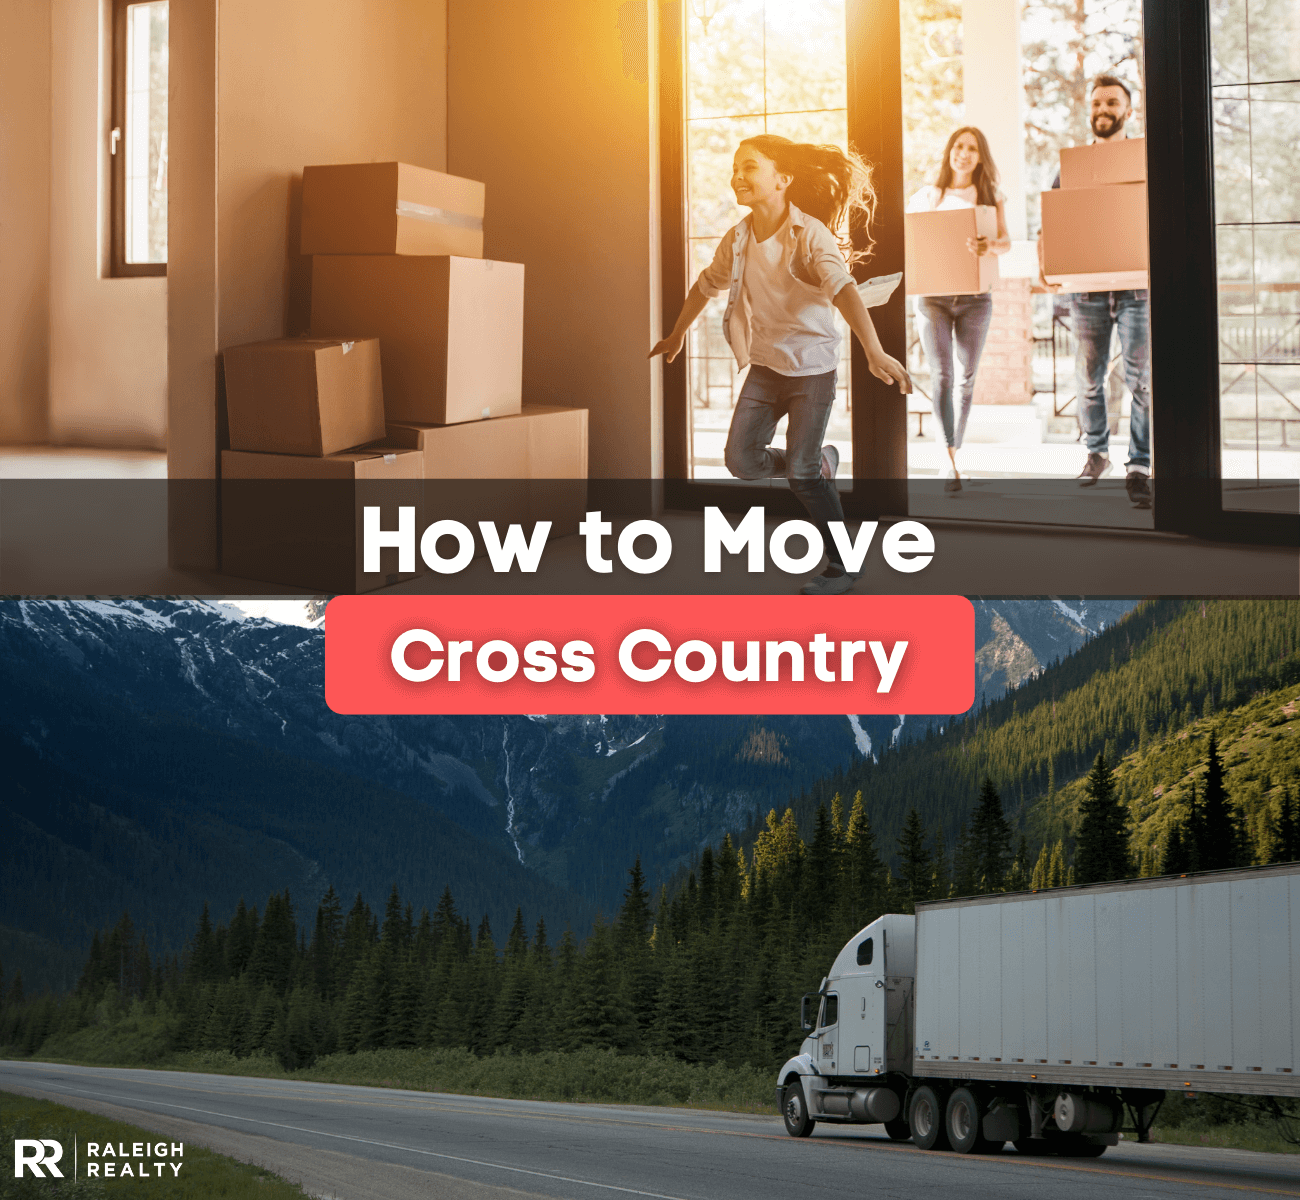 How to Move Cross Country and how to do it while saving money